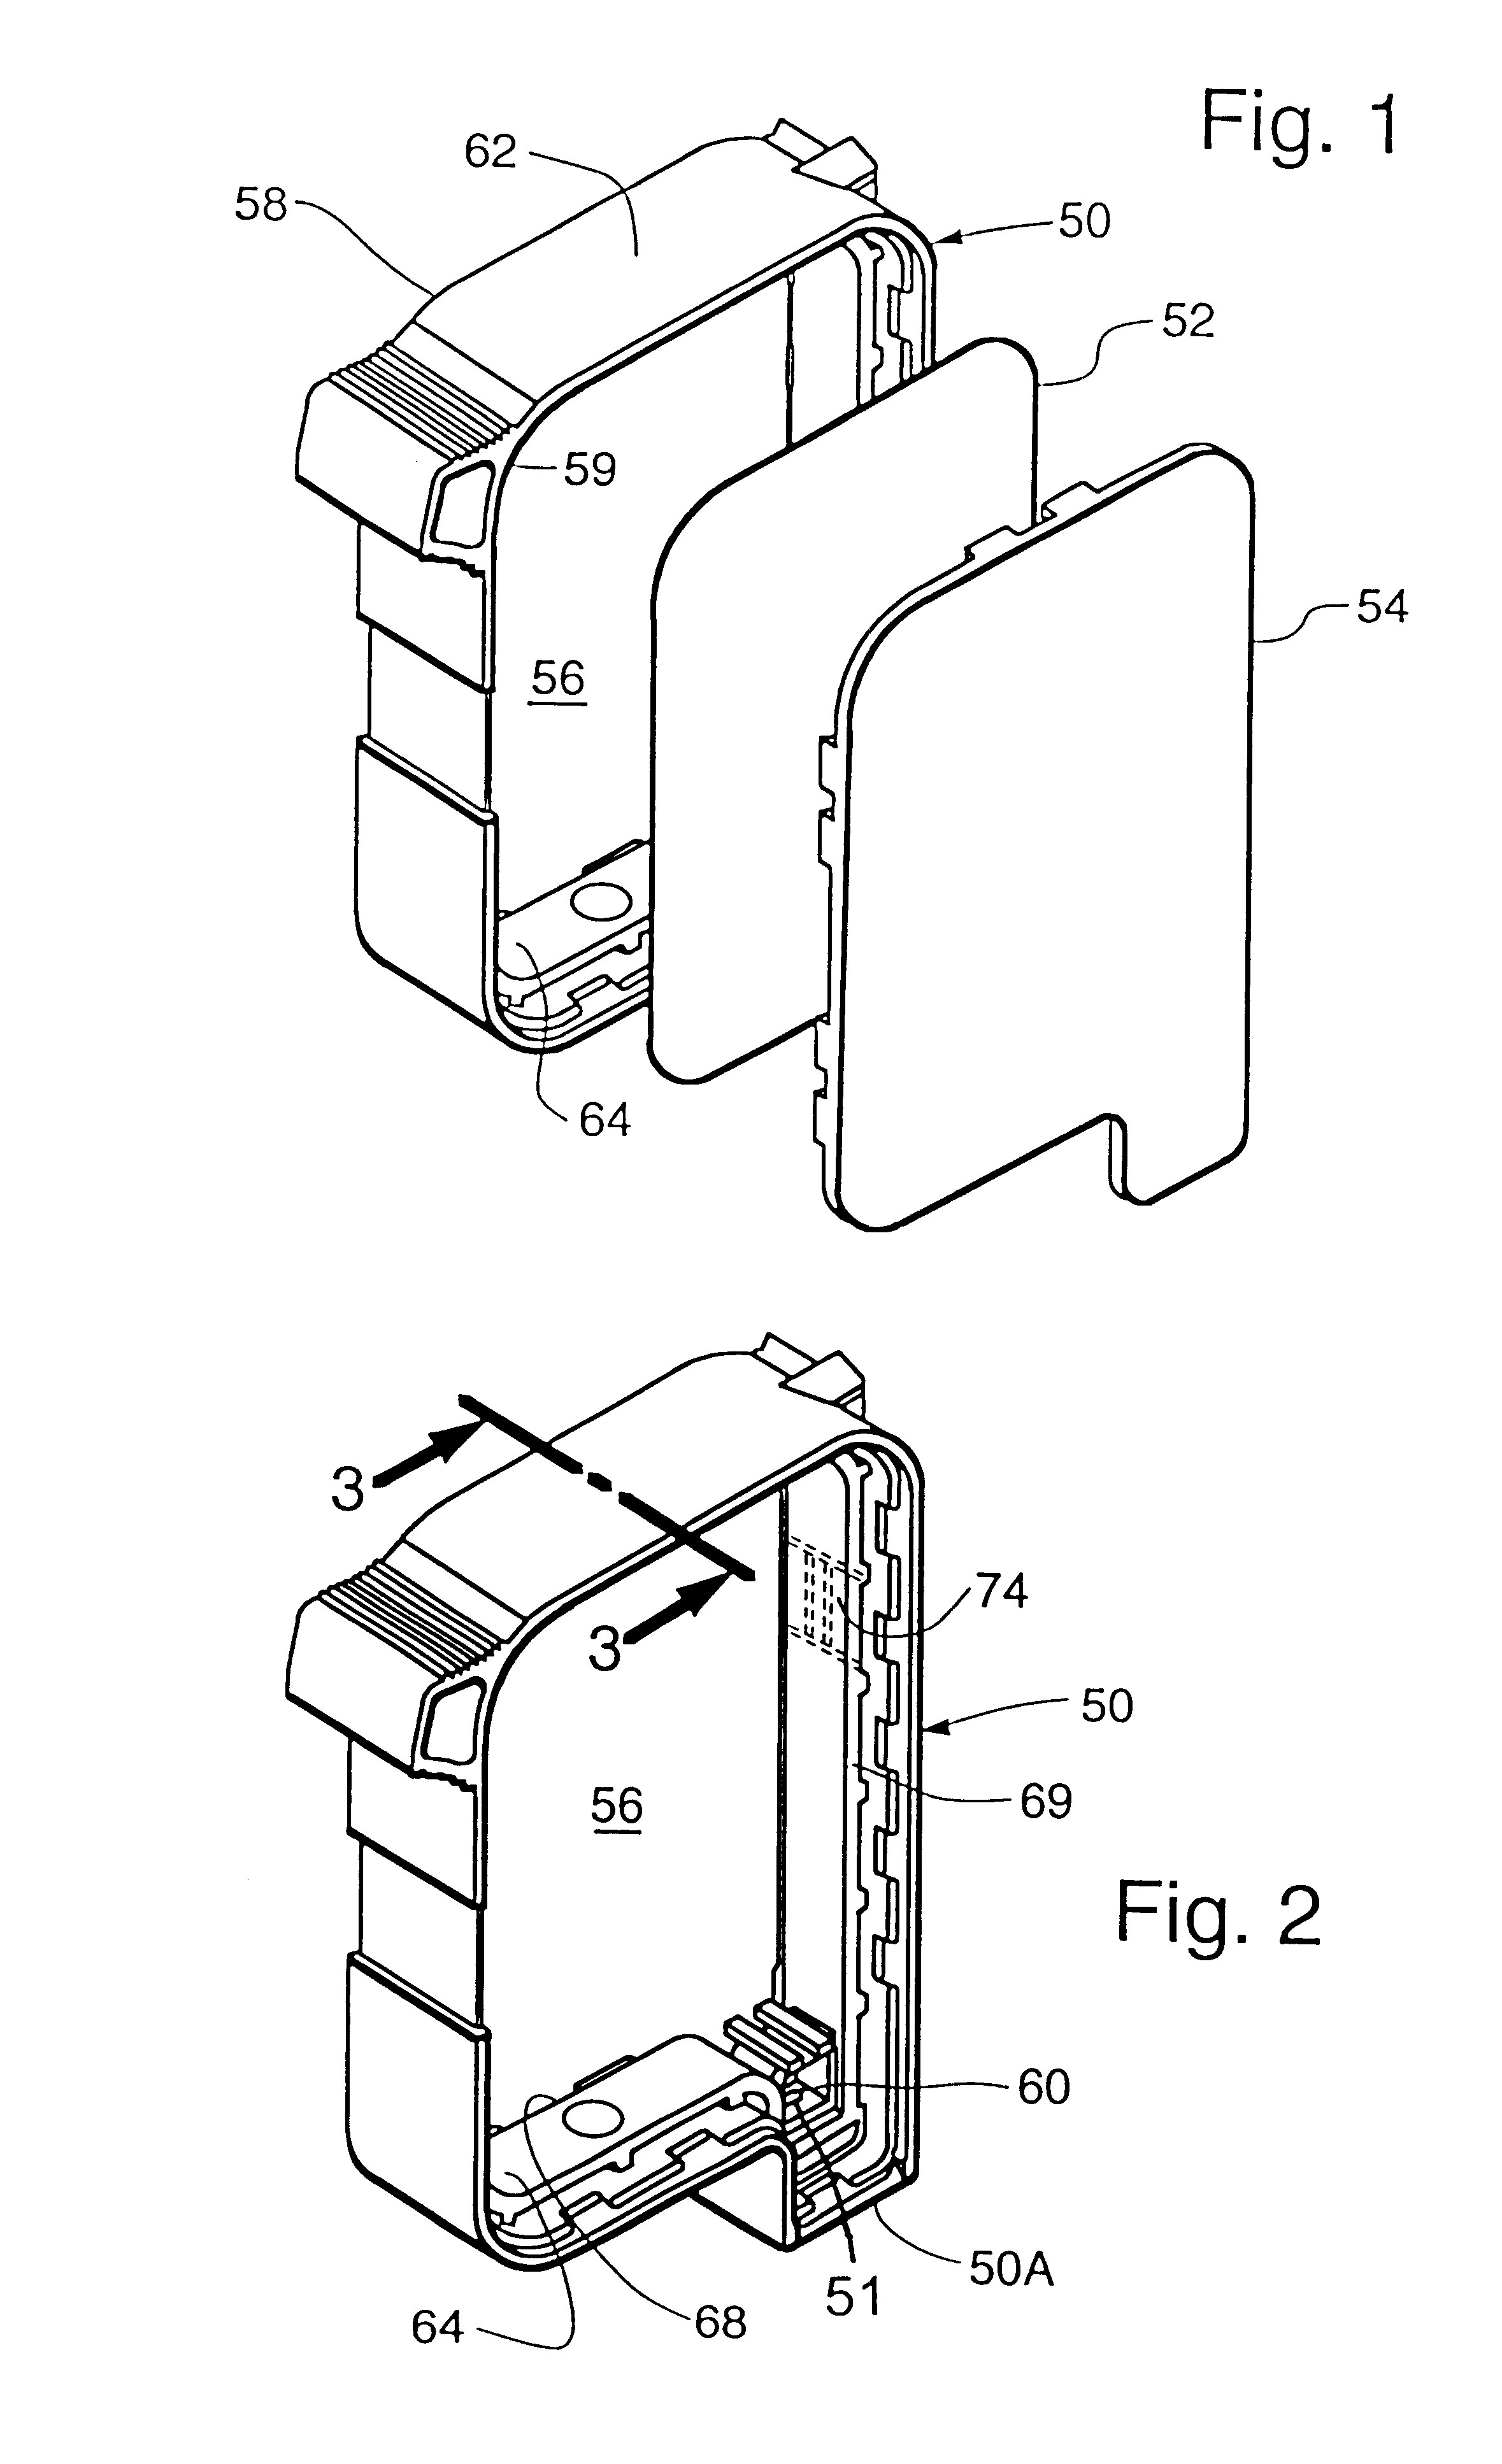 Print head cartridge made with jointless one-piece frame consisting of a single material throughout